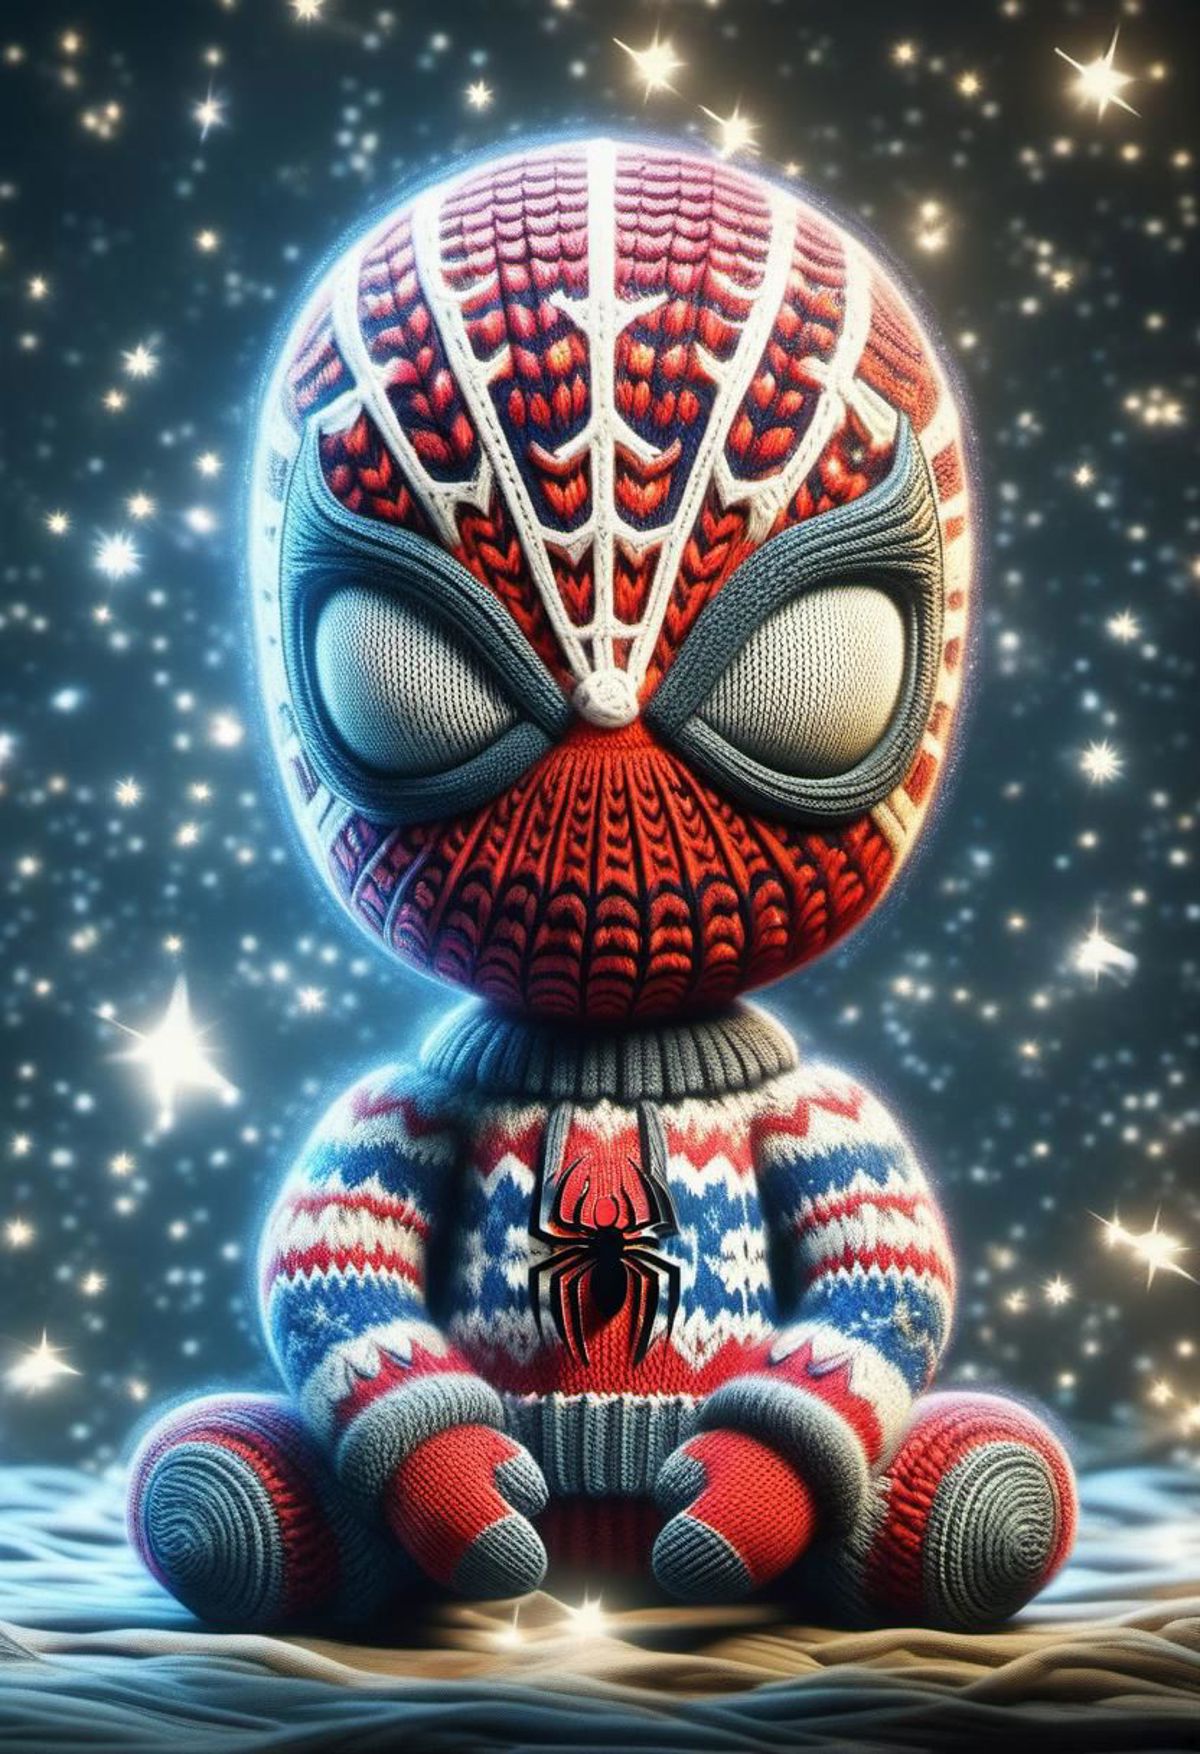 A Spiderman Sweater on a Stuffed Toy